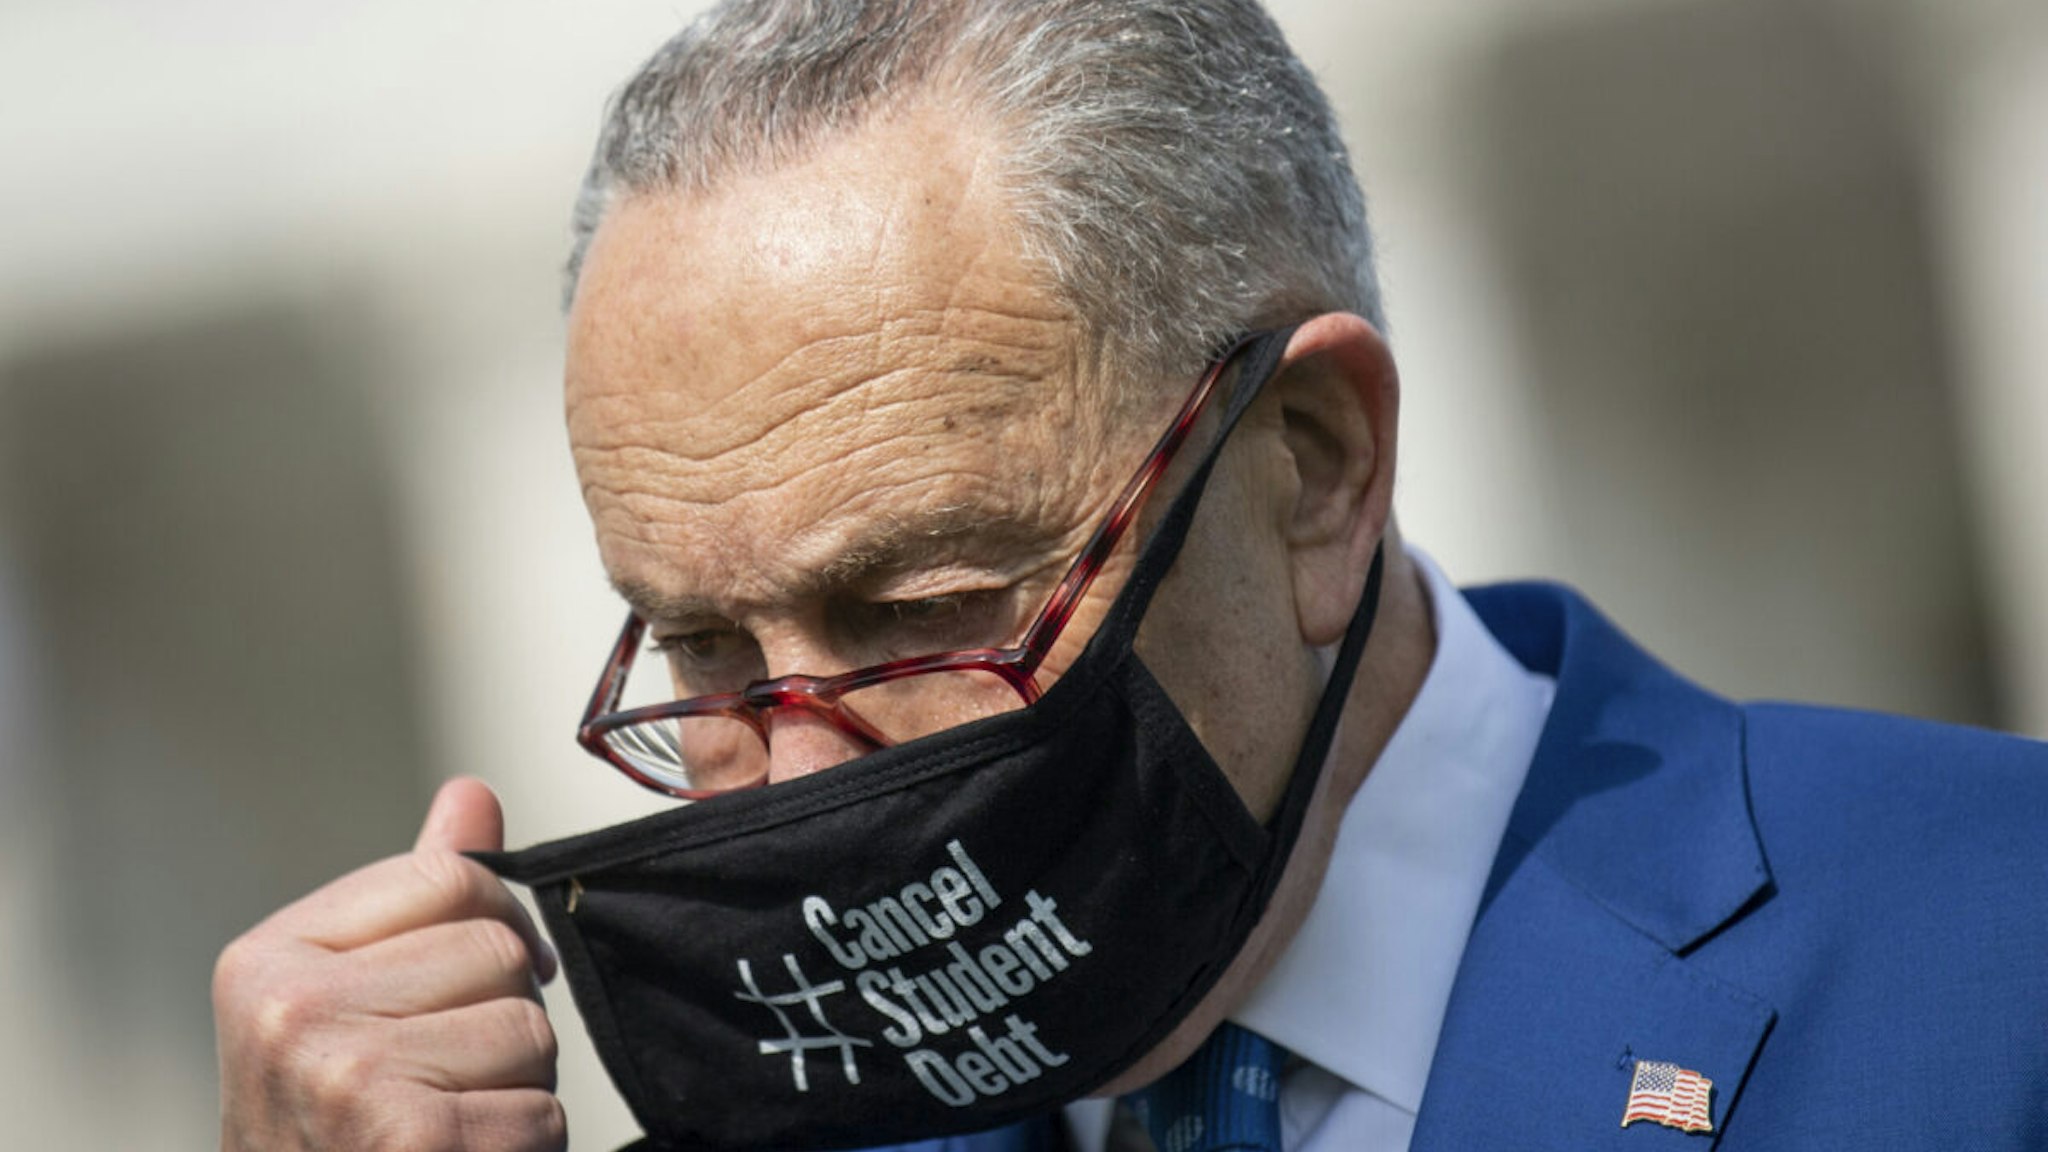 Senate Majority Leader Chuck Schumer, D-N.Y., wears a face mask that reads #CancelStudentDebt during a news conference about the Senate vote, later in the day, on methane regulation outside in Washington on Wednesday, April 28, 2021.